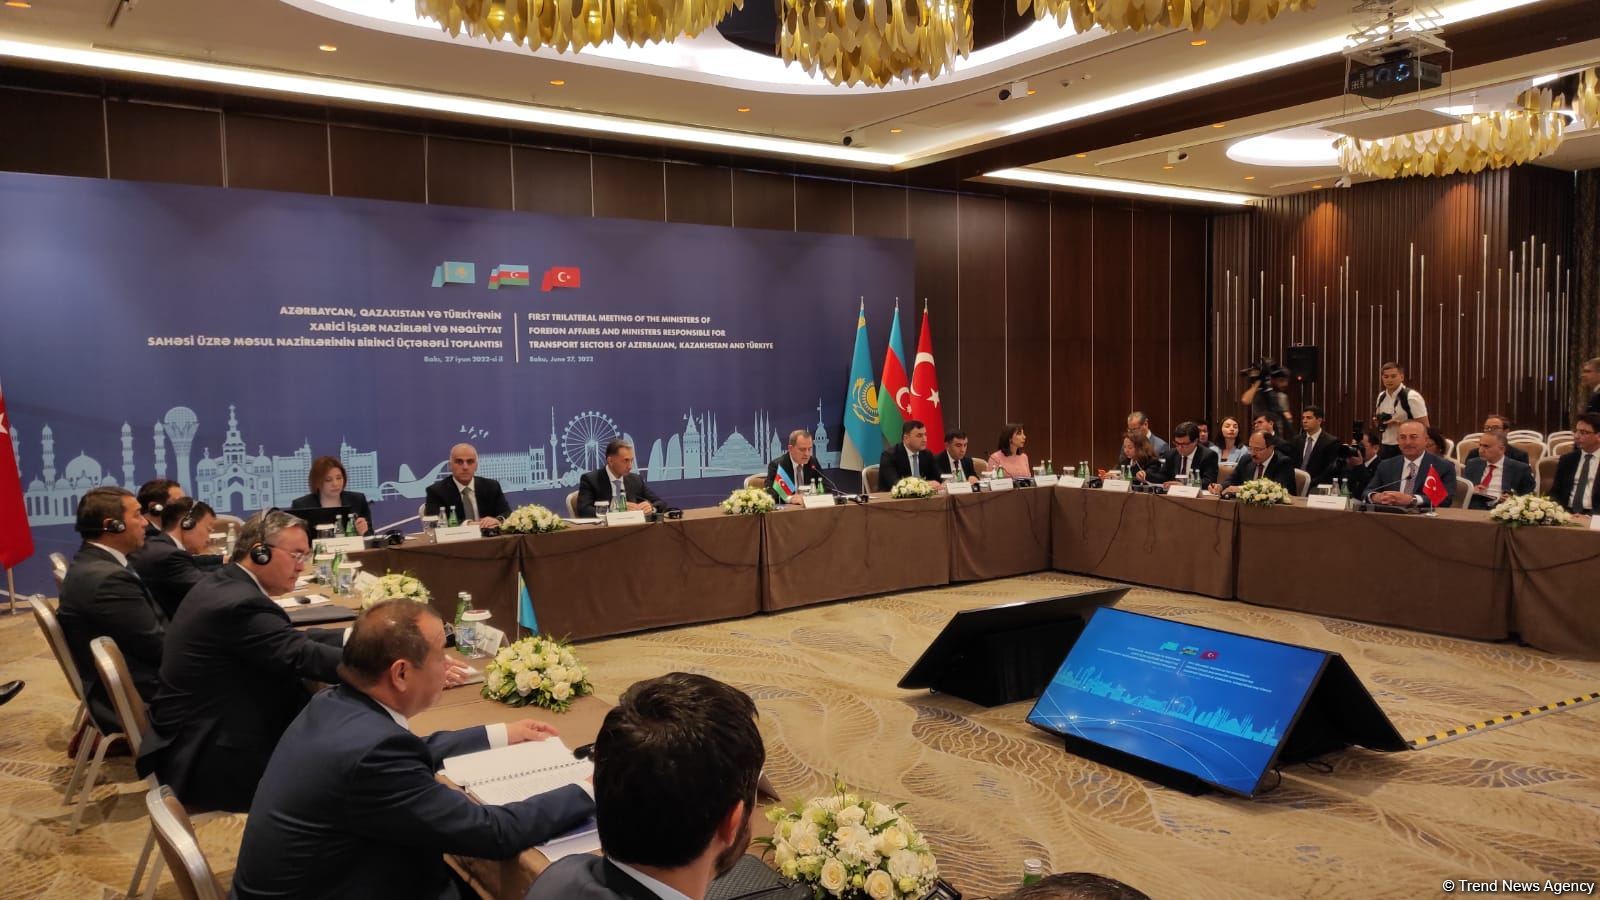 Meeting of Azerbaijani, Turkish and Kazakh FMs serving to ensure security of region – FM (PHOTO)